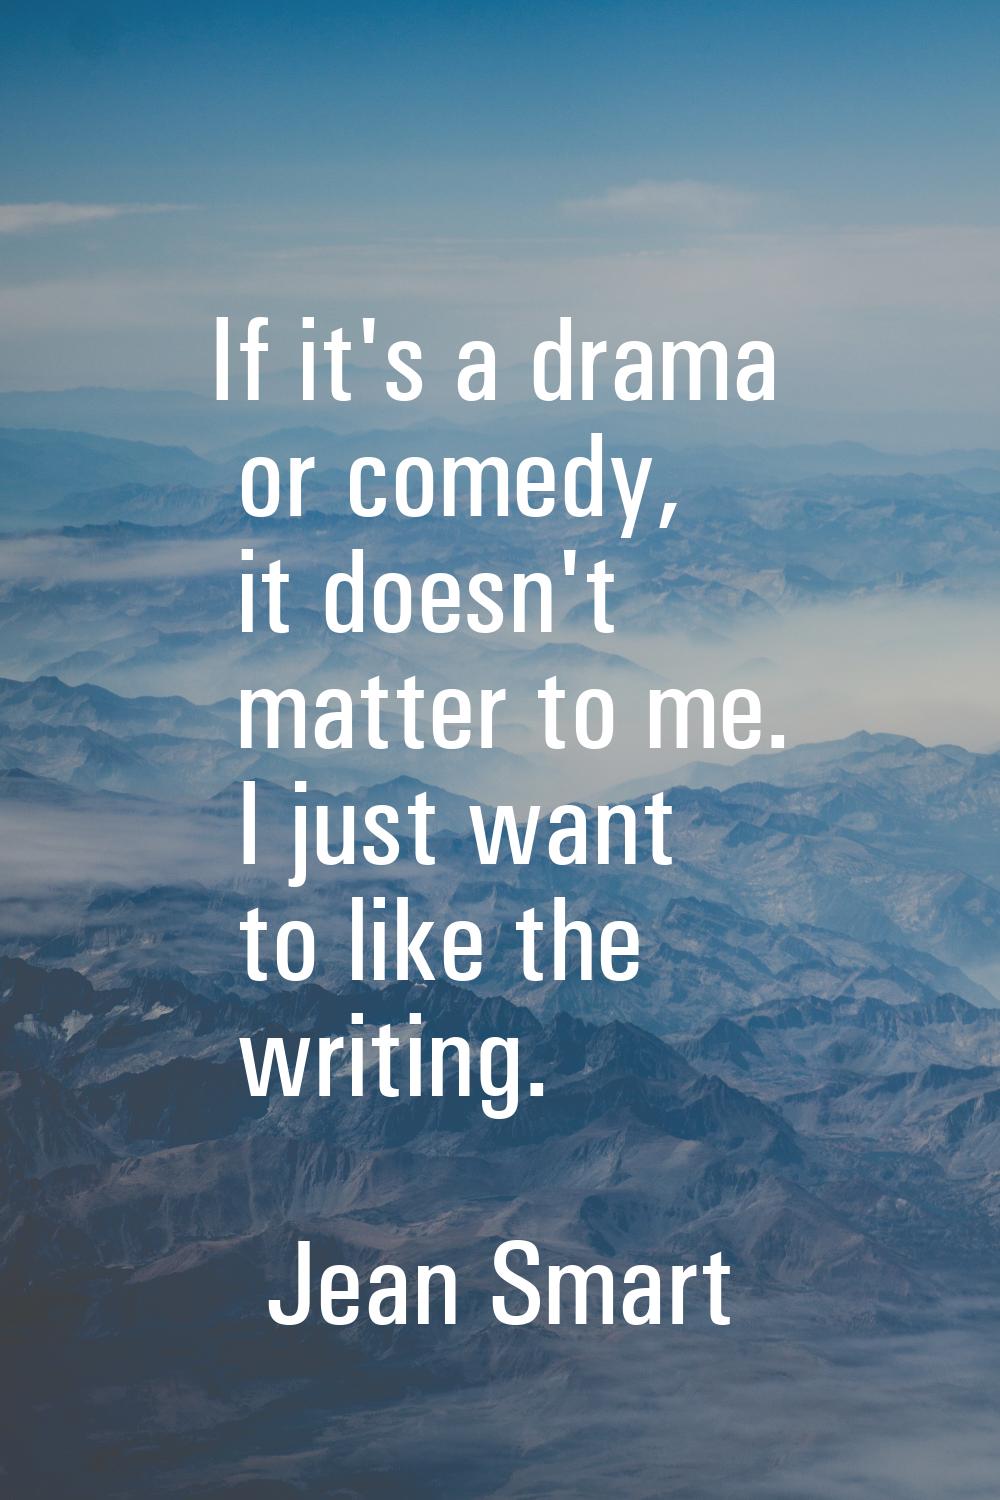 If it's a drama or comedy, it doesn't matter to me. I just want to like the writing.